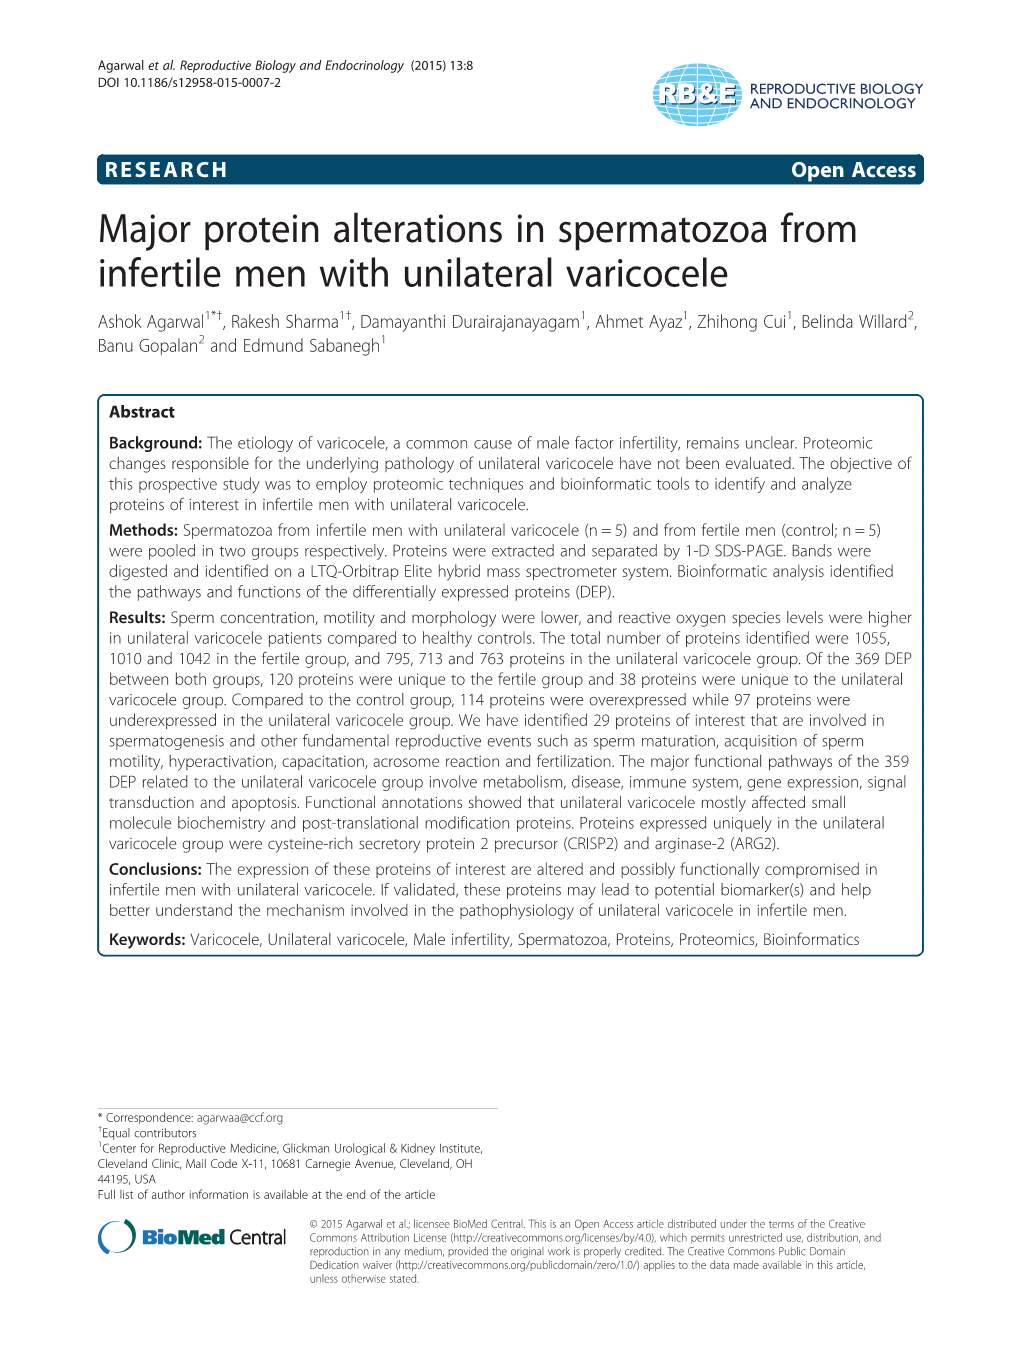 Major Protein Alterations in Spermatozoa from Infertile Men With